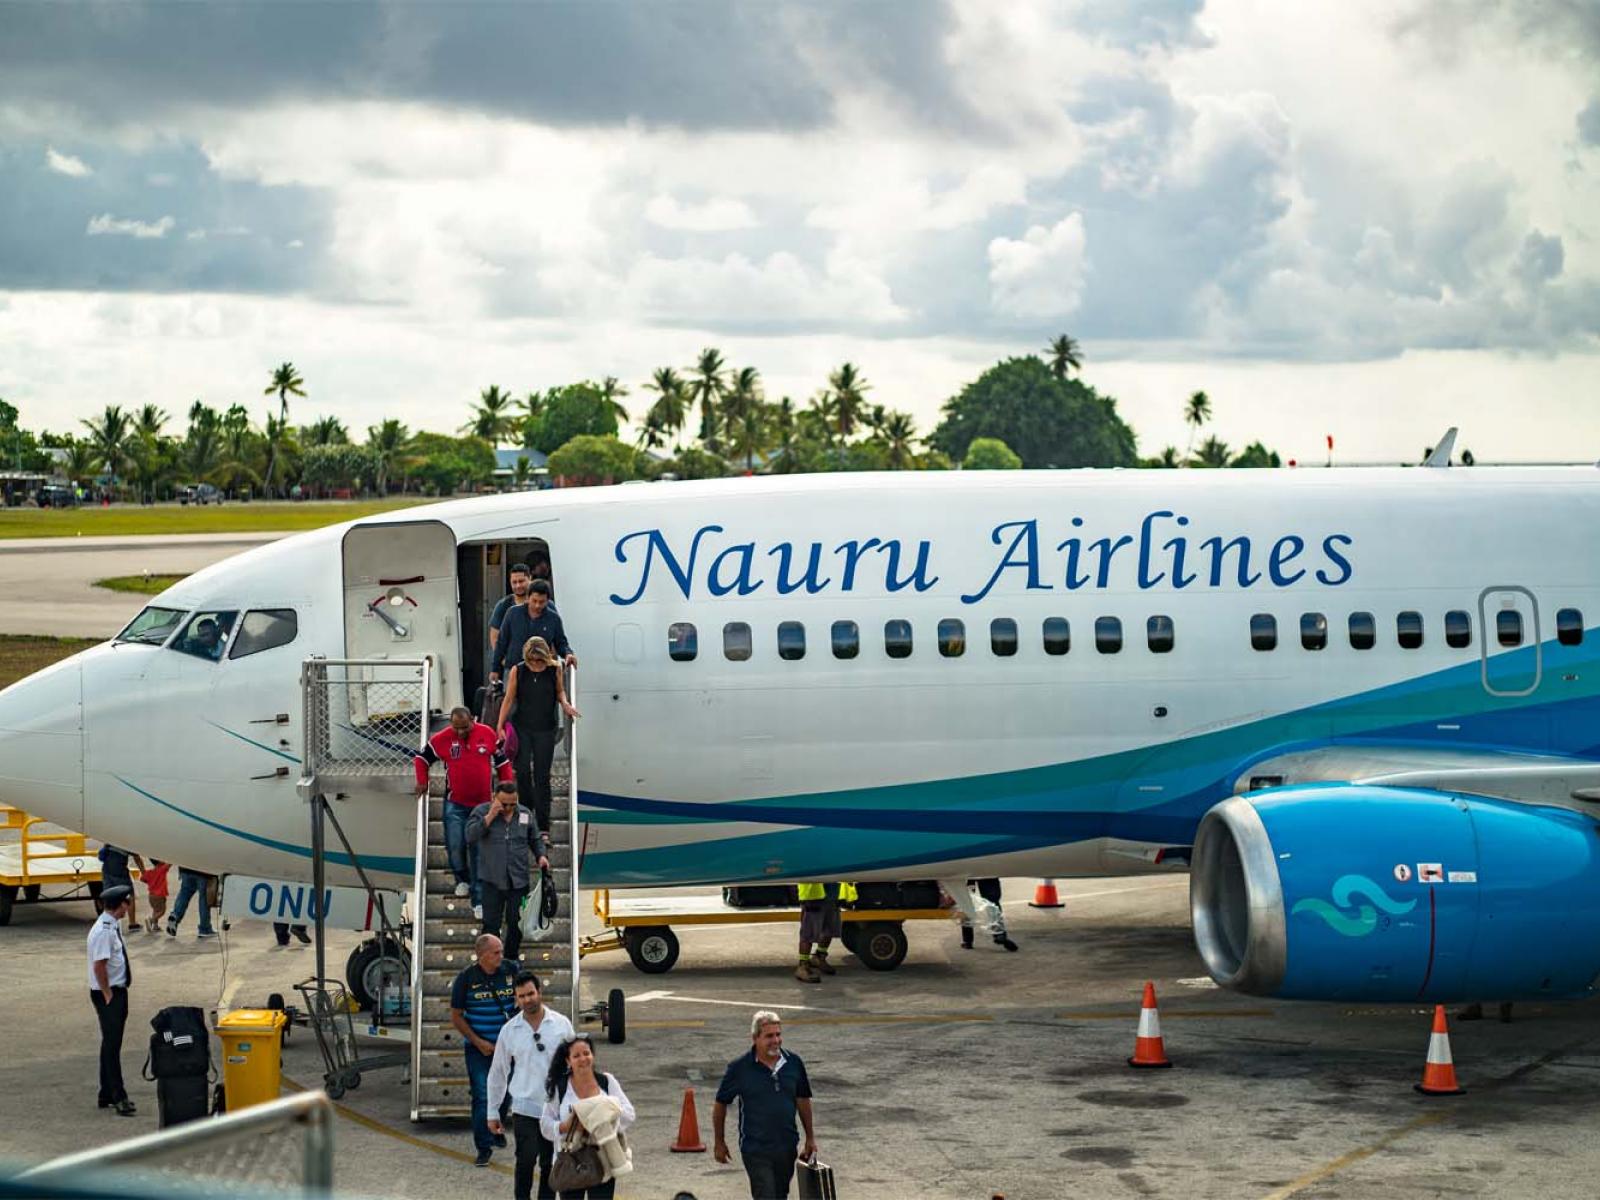 PRIF Aviation study to restart air services in the Pacific new